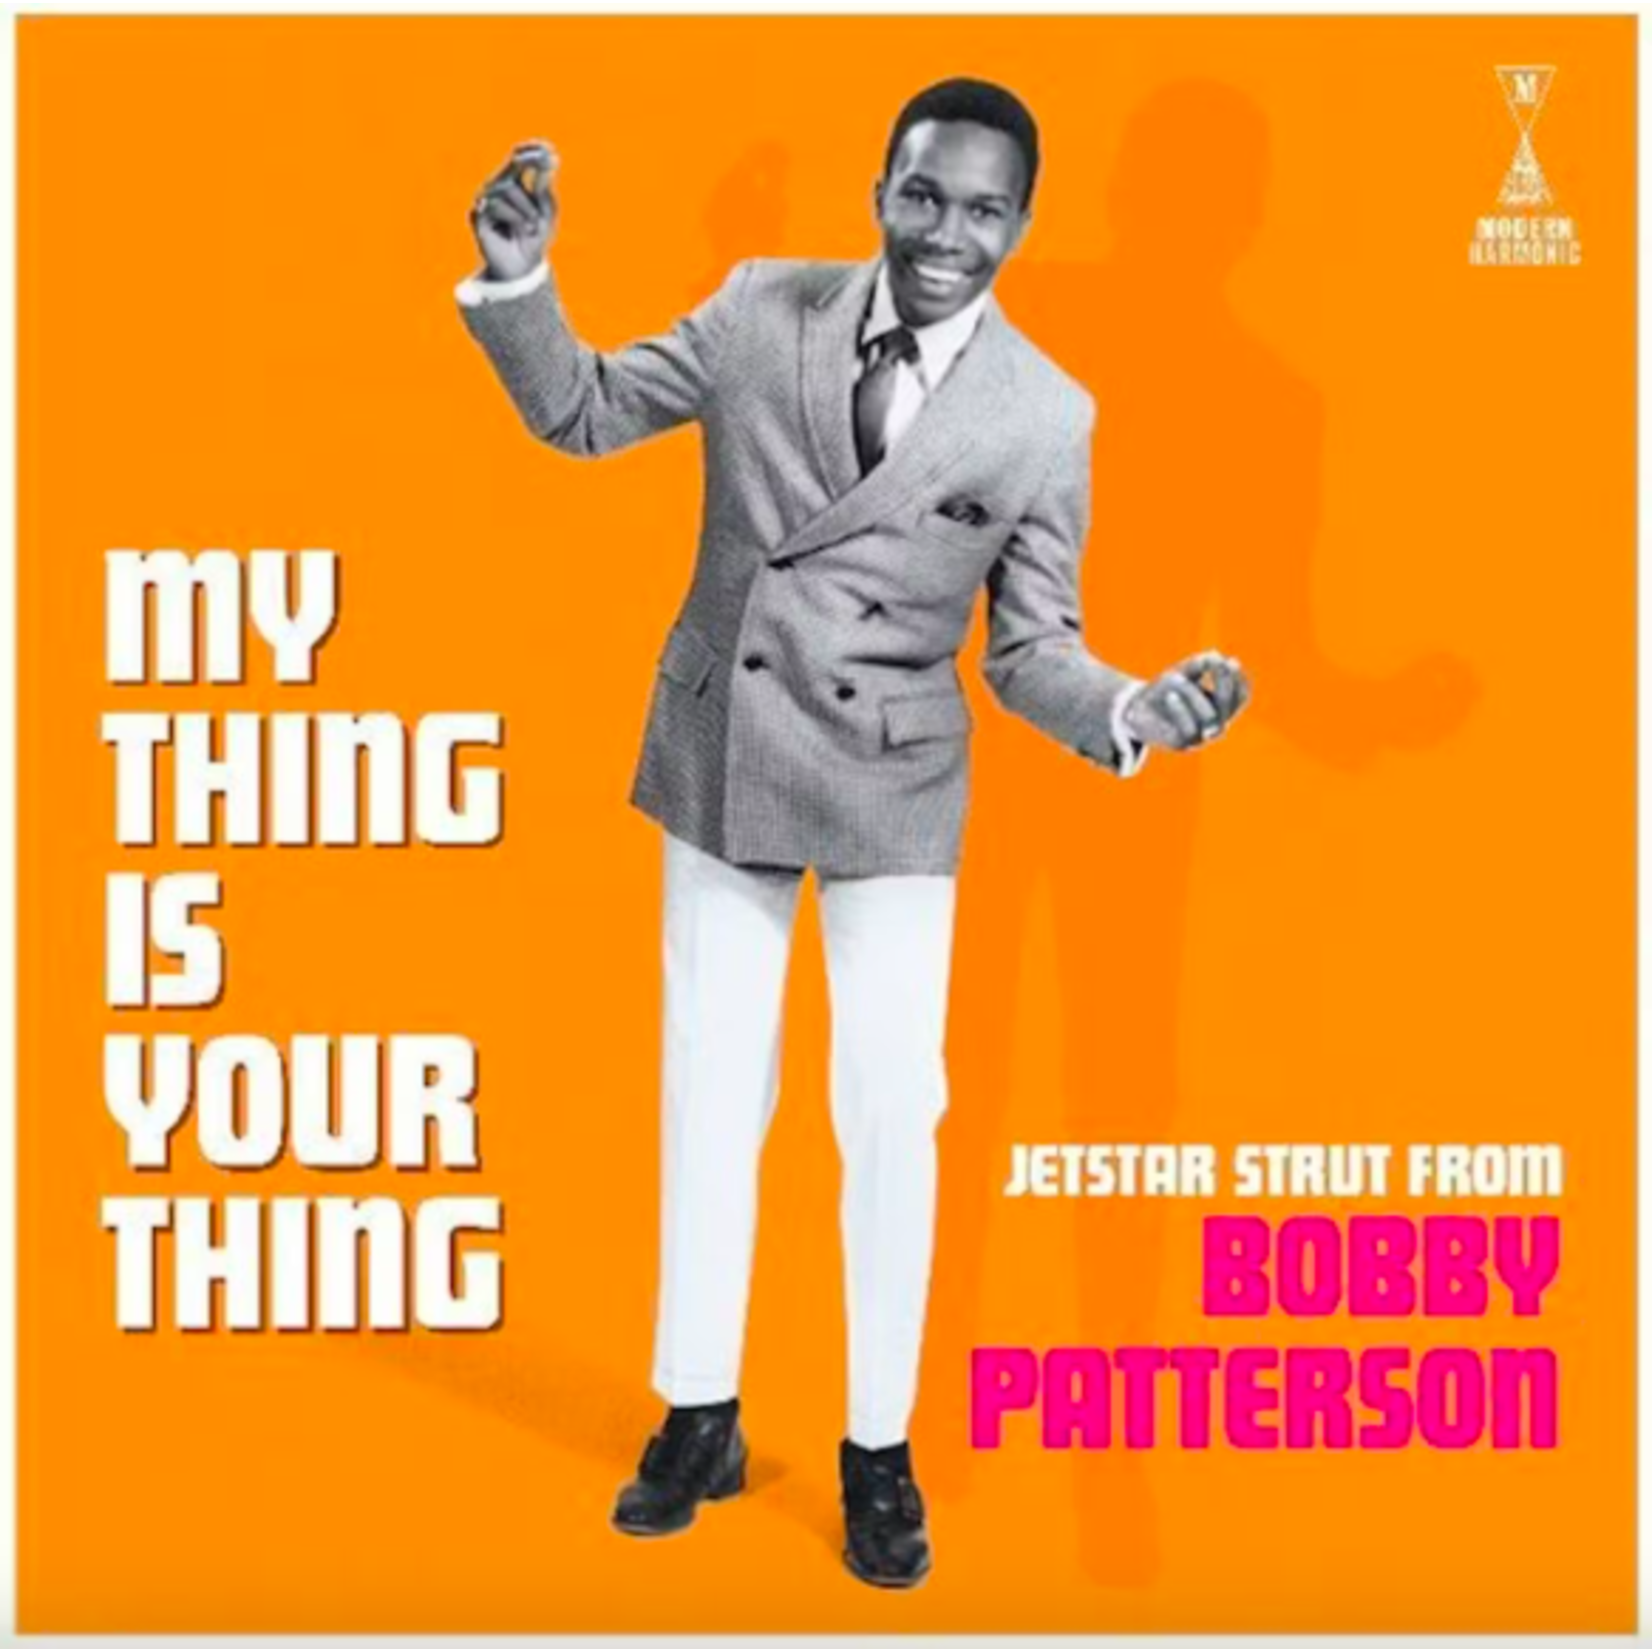 [New] Patterson, Bobby: My Thing Is Your Thing - Jetstar Strut From Bobby Patterson [MODERN HARMONIC]